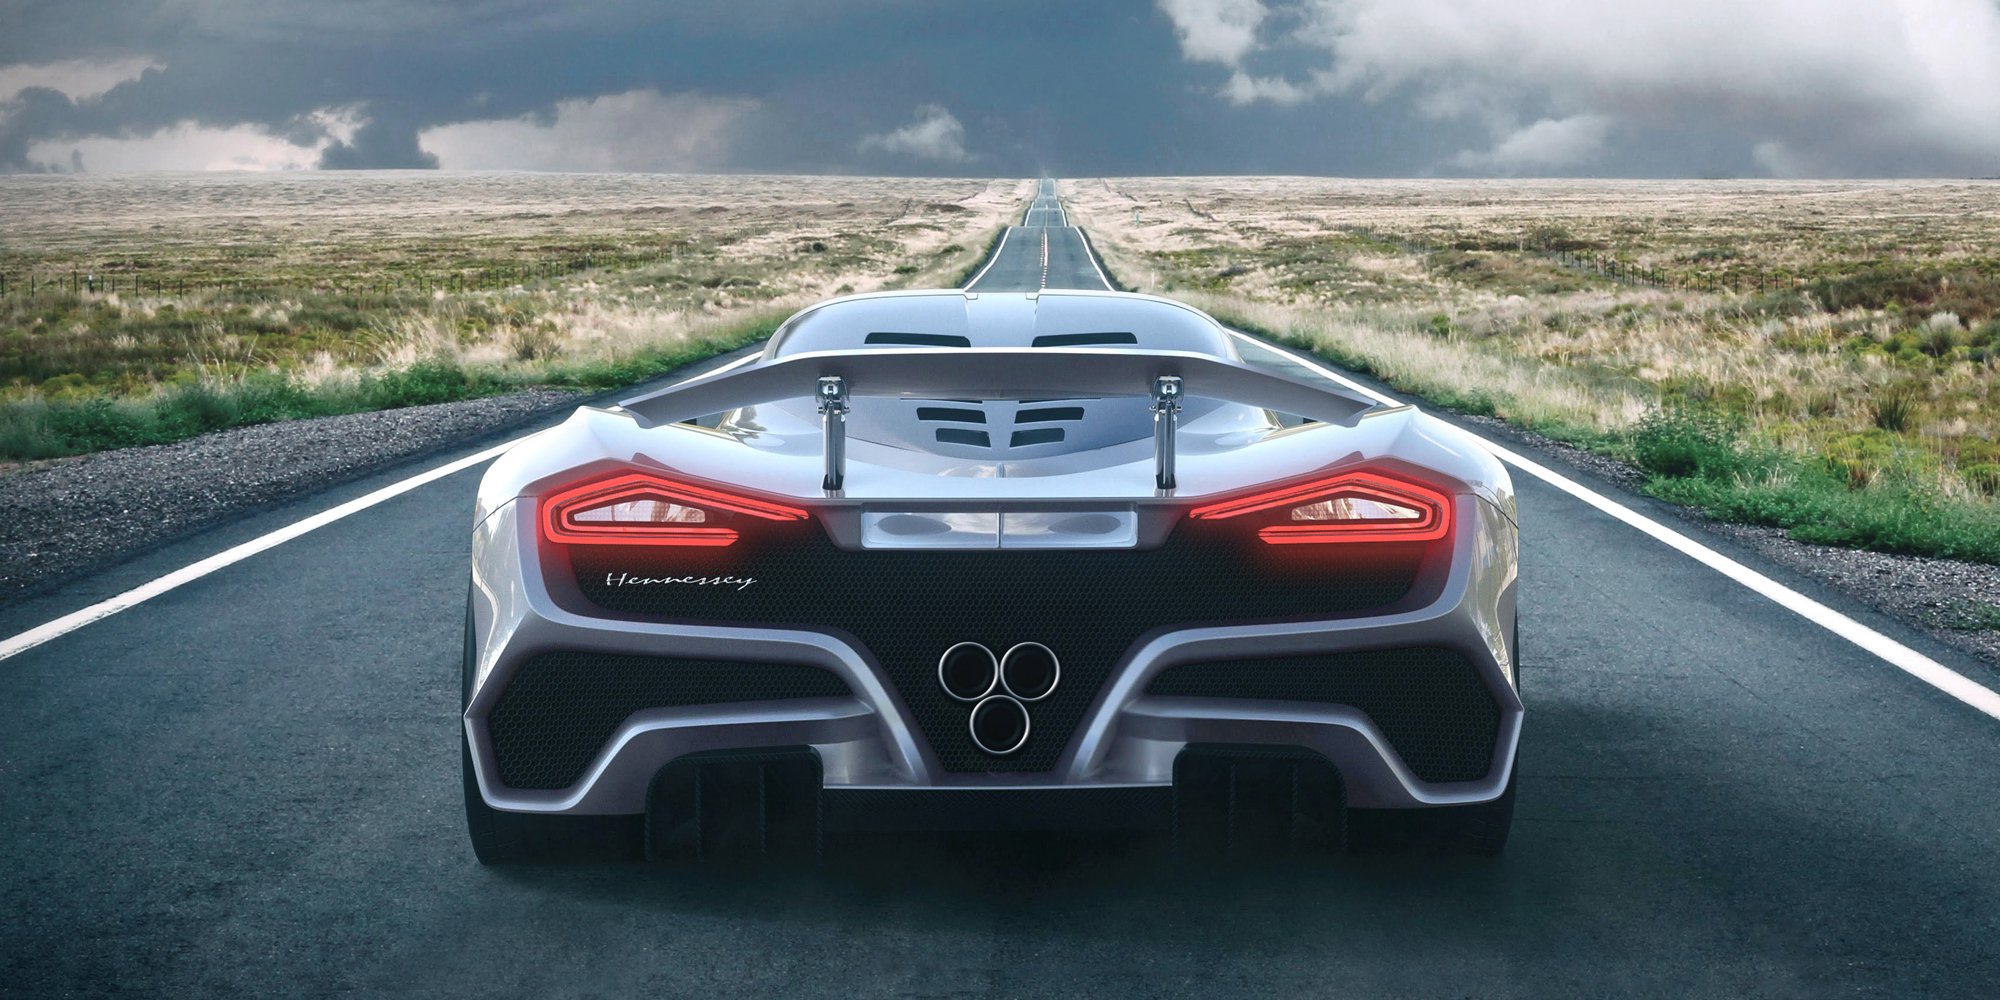 Hennessey S Venom F5 Hypercar Could Break The 300 Mph Barrier